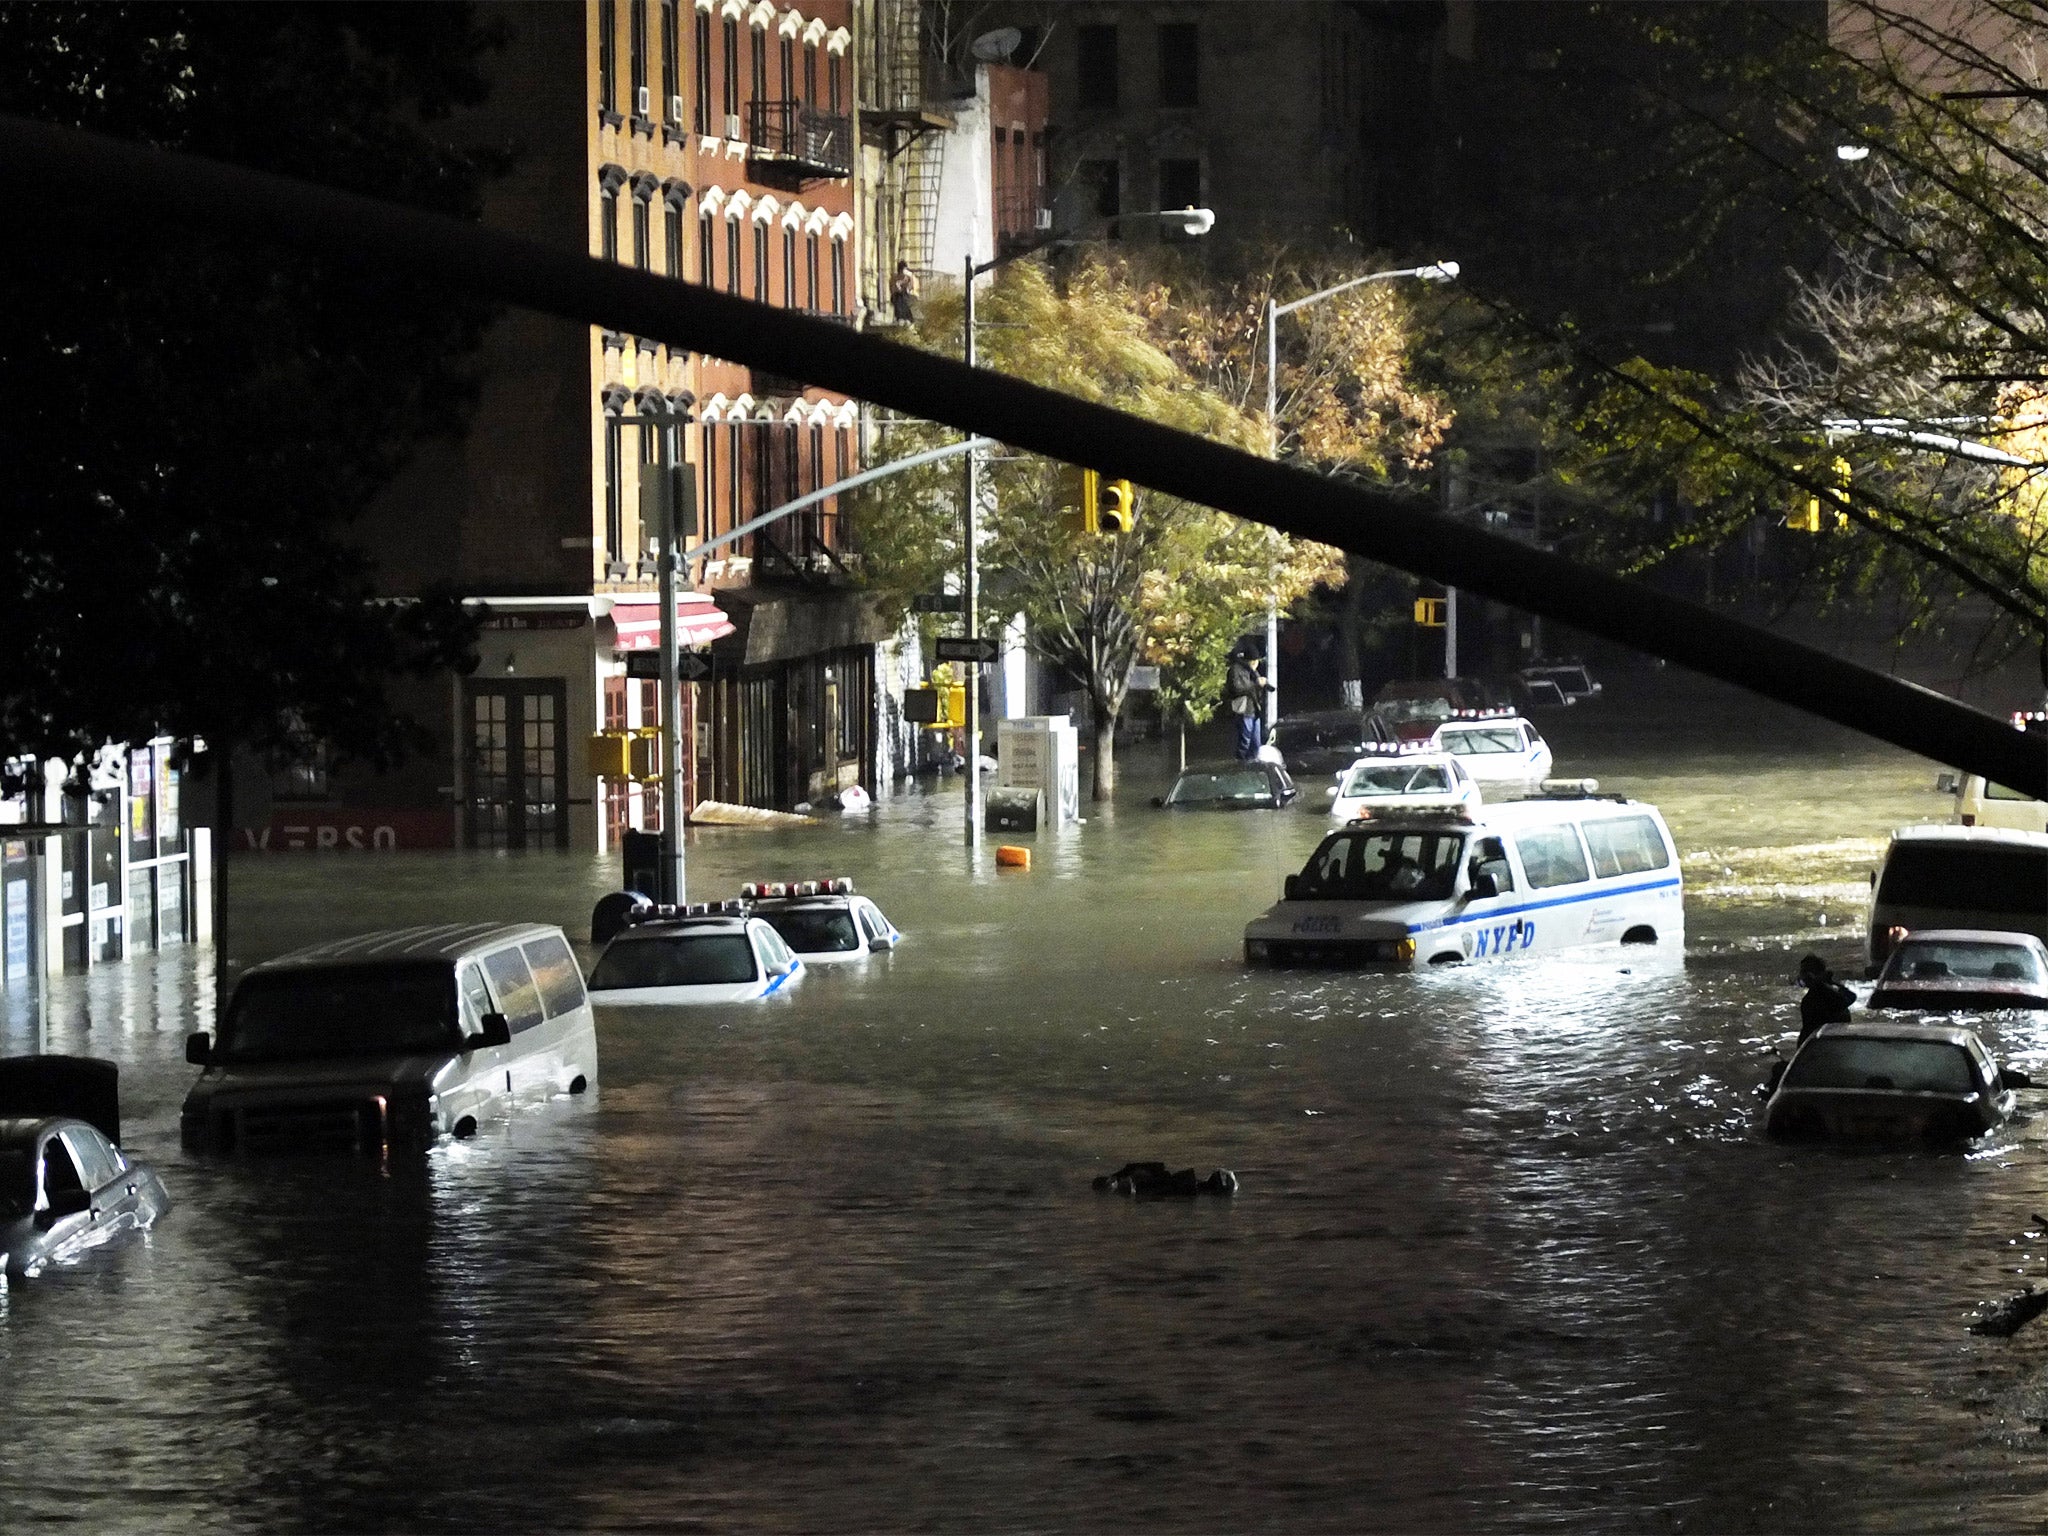 Rising panic: cars submerged in Manhattan after Hurricane Sandy in 2012 (Getty)